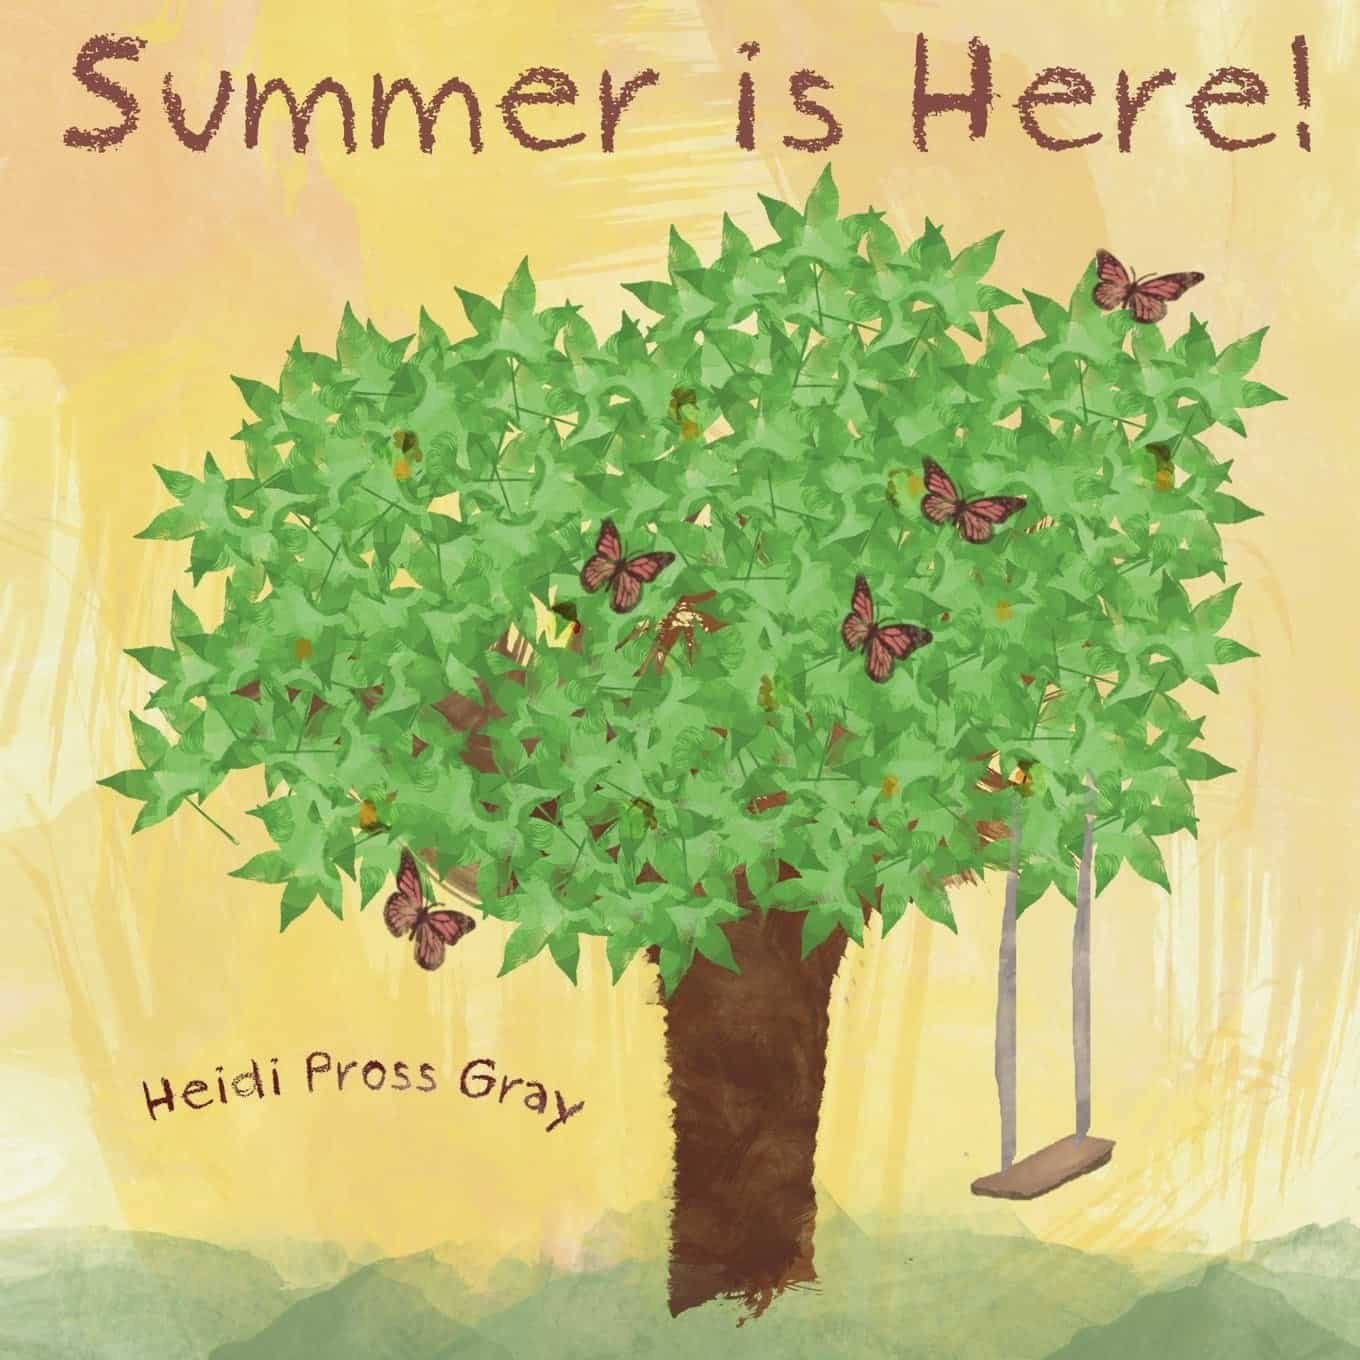 10+ Top Books for Kids to Read this Summer: Summer is Here | www.thepinningmama.com